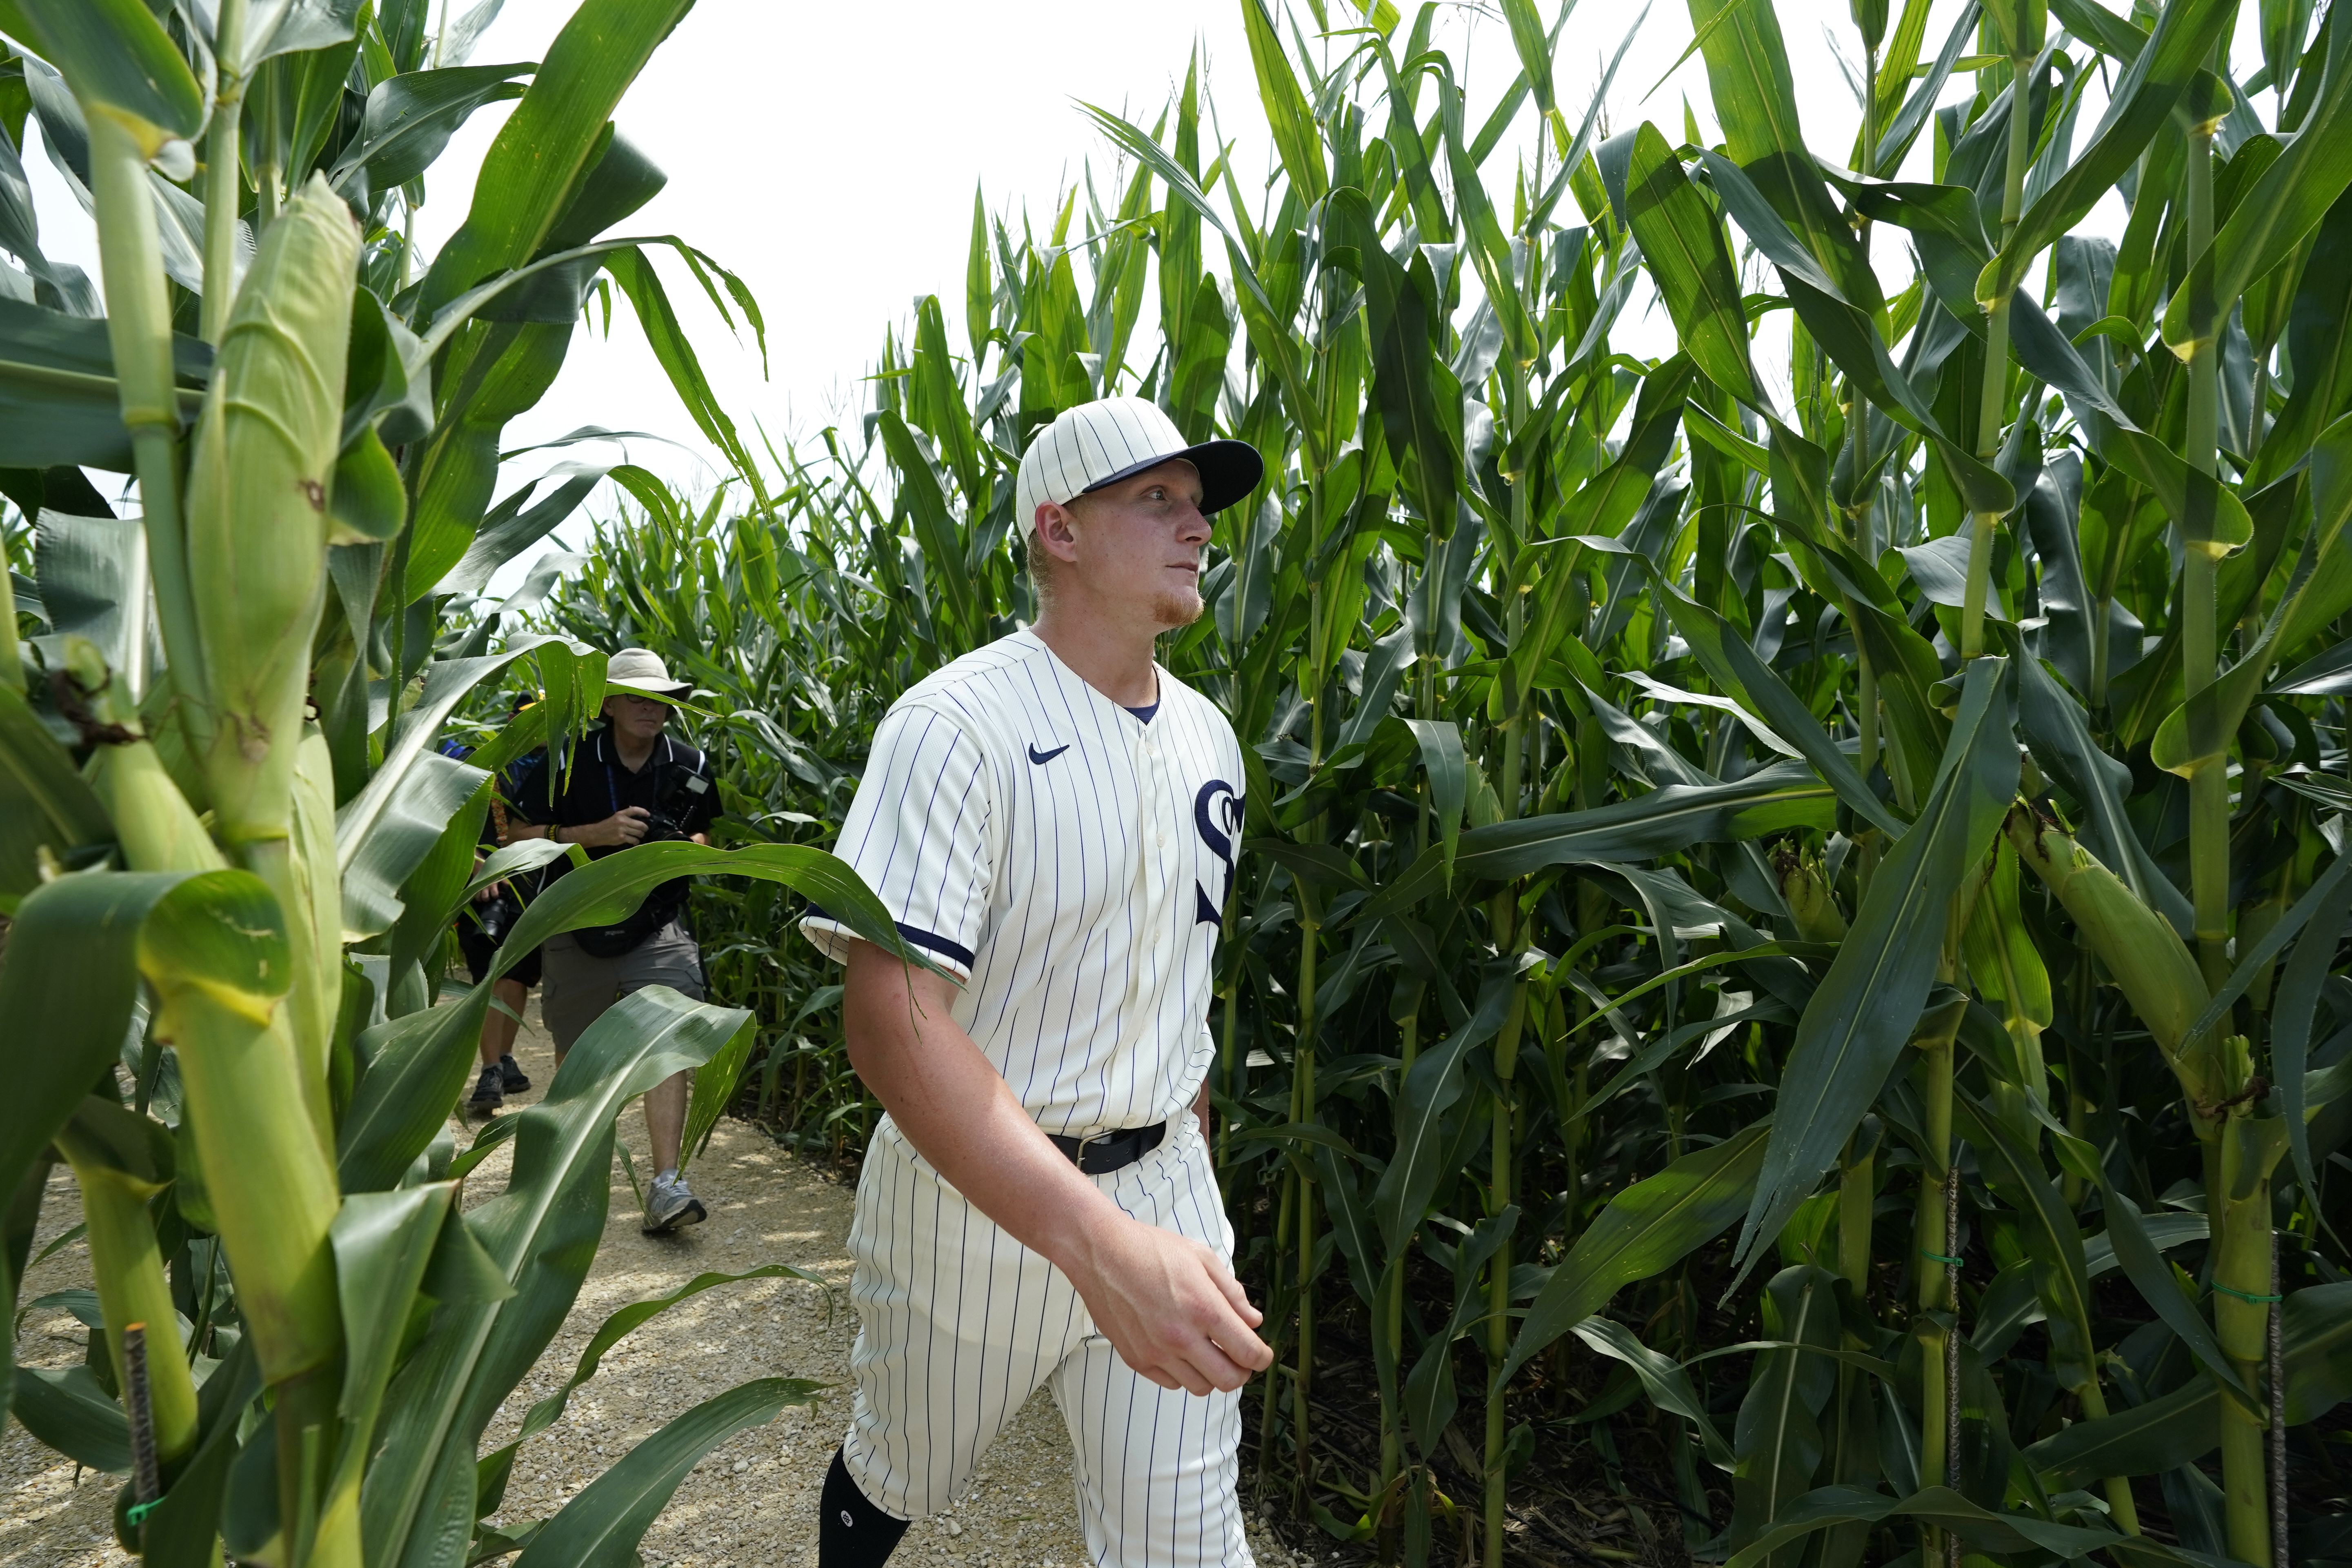 Yankees and White Sox recreate Field of Dreams in Iowa cornfields